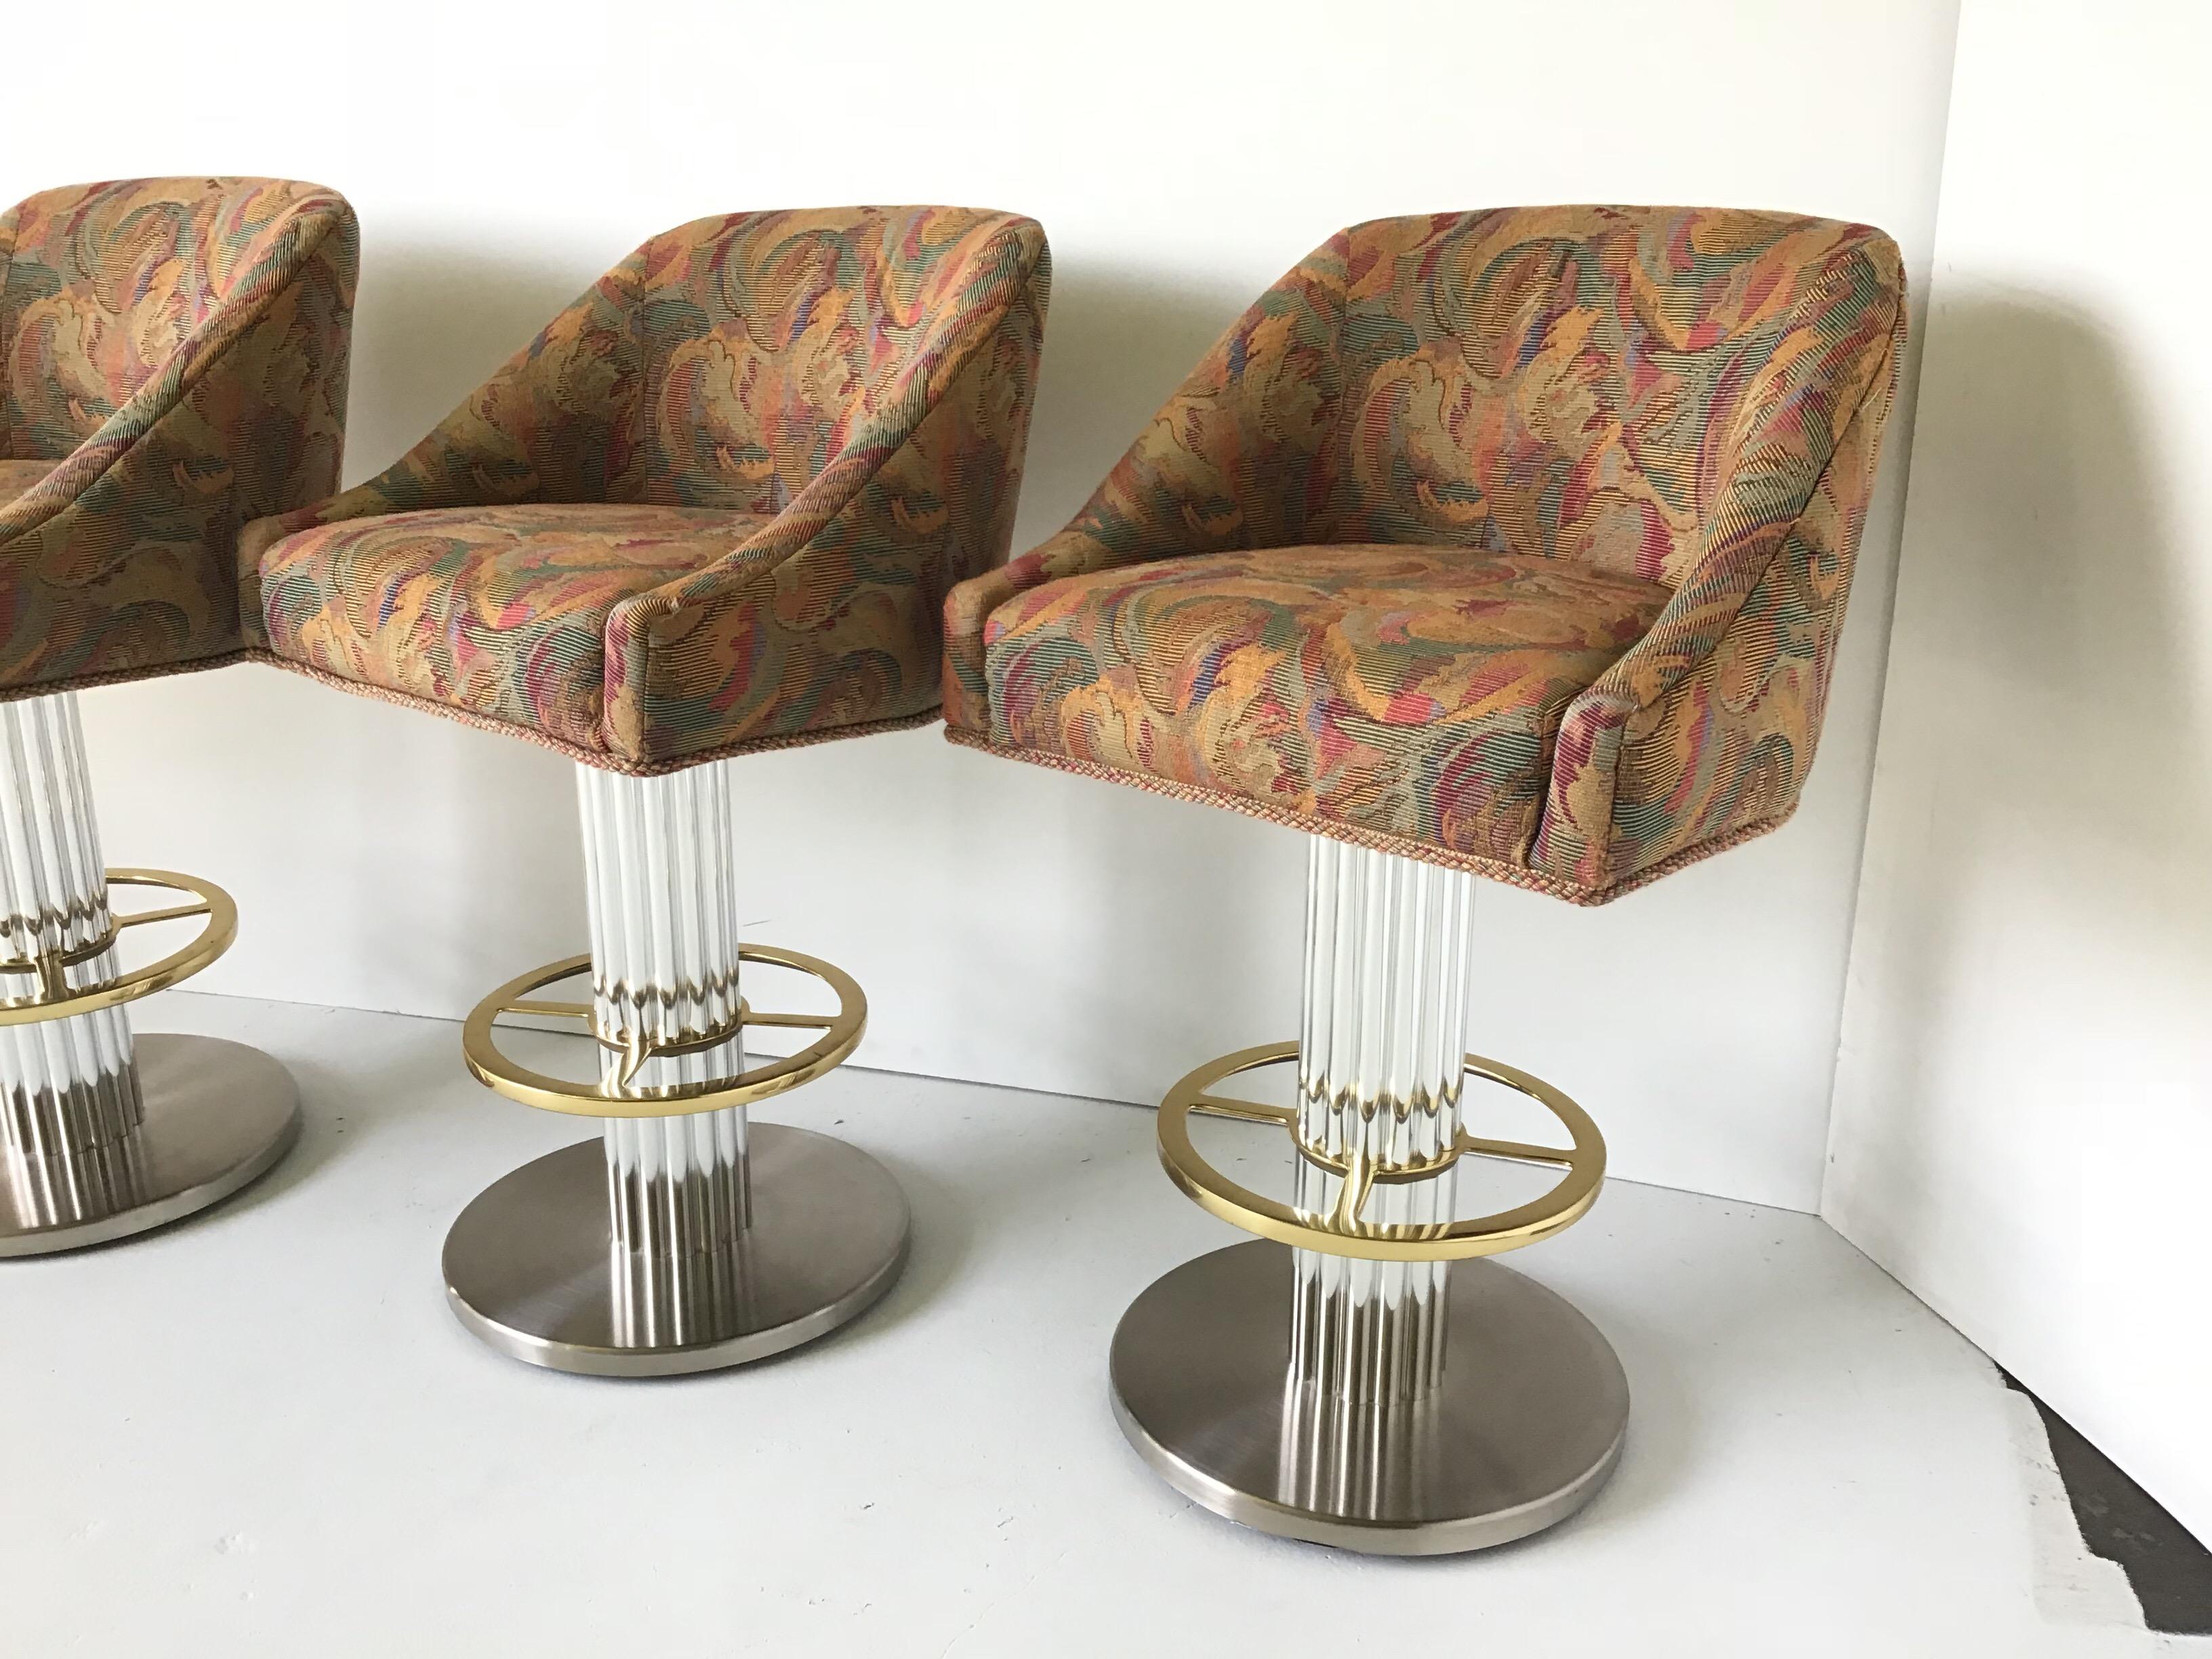 Hello 1980s! This is a set of four Designs for Leisure barstools. They have polished steel bases, chromed fluted pedestals, with brass foot rests. These are the most comfy and stylish barstools ever. They are extremely heavy. This now defunct